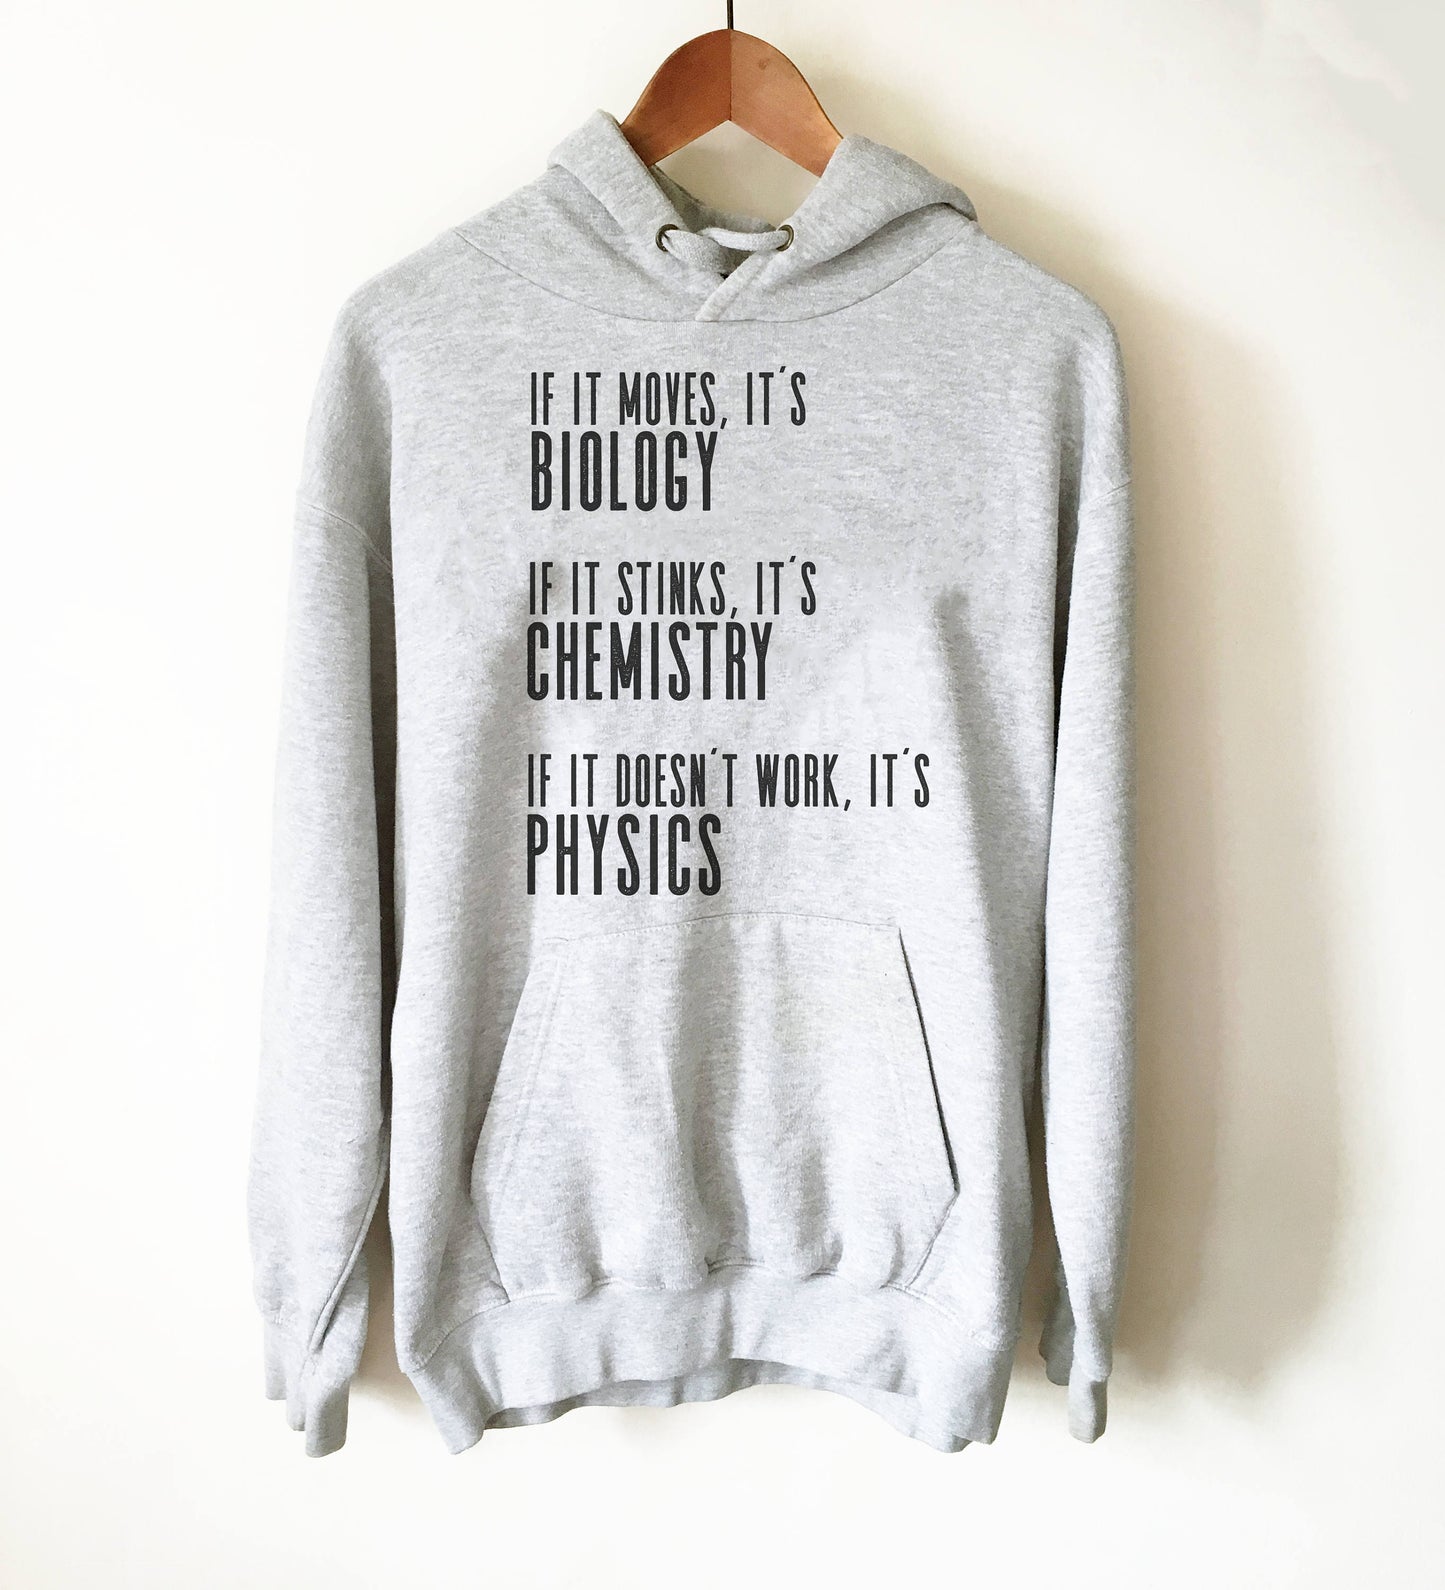 If It Moves It's Biology Hoodie - Chemistry Shirt, Physics shirt, Chemistry shirt, Science shirt, Periodic table shirt